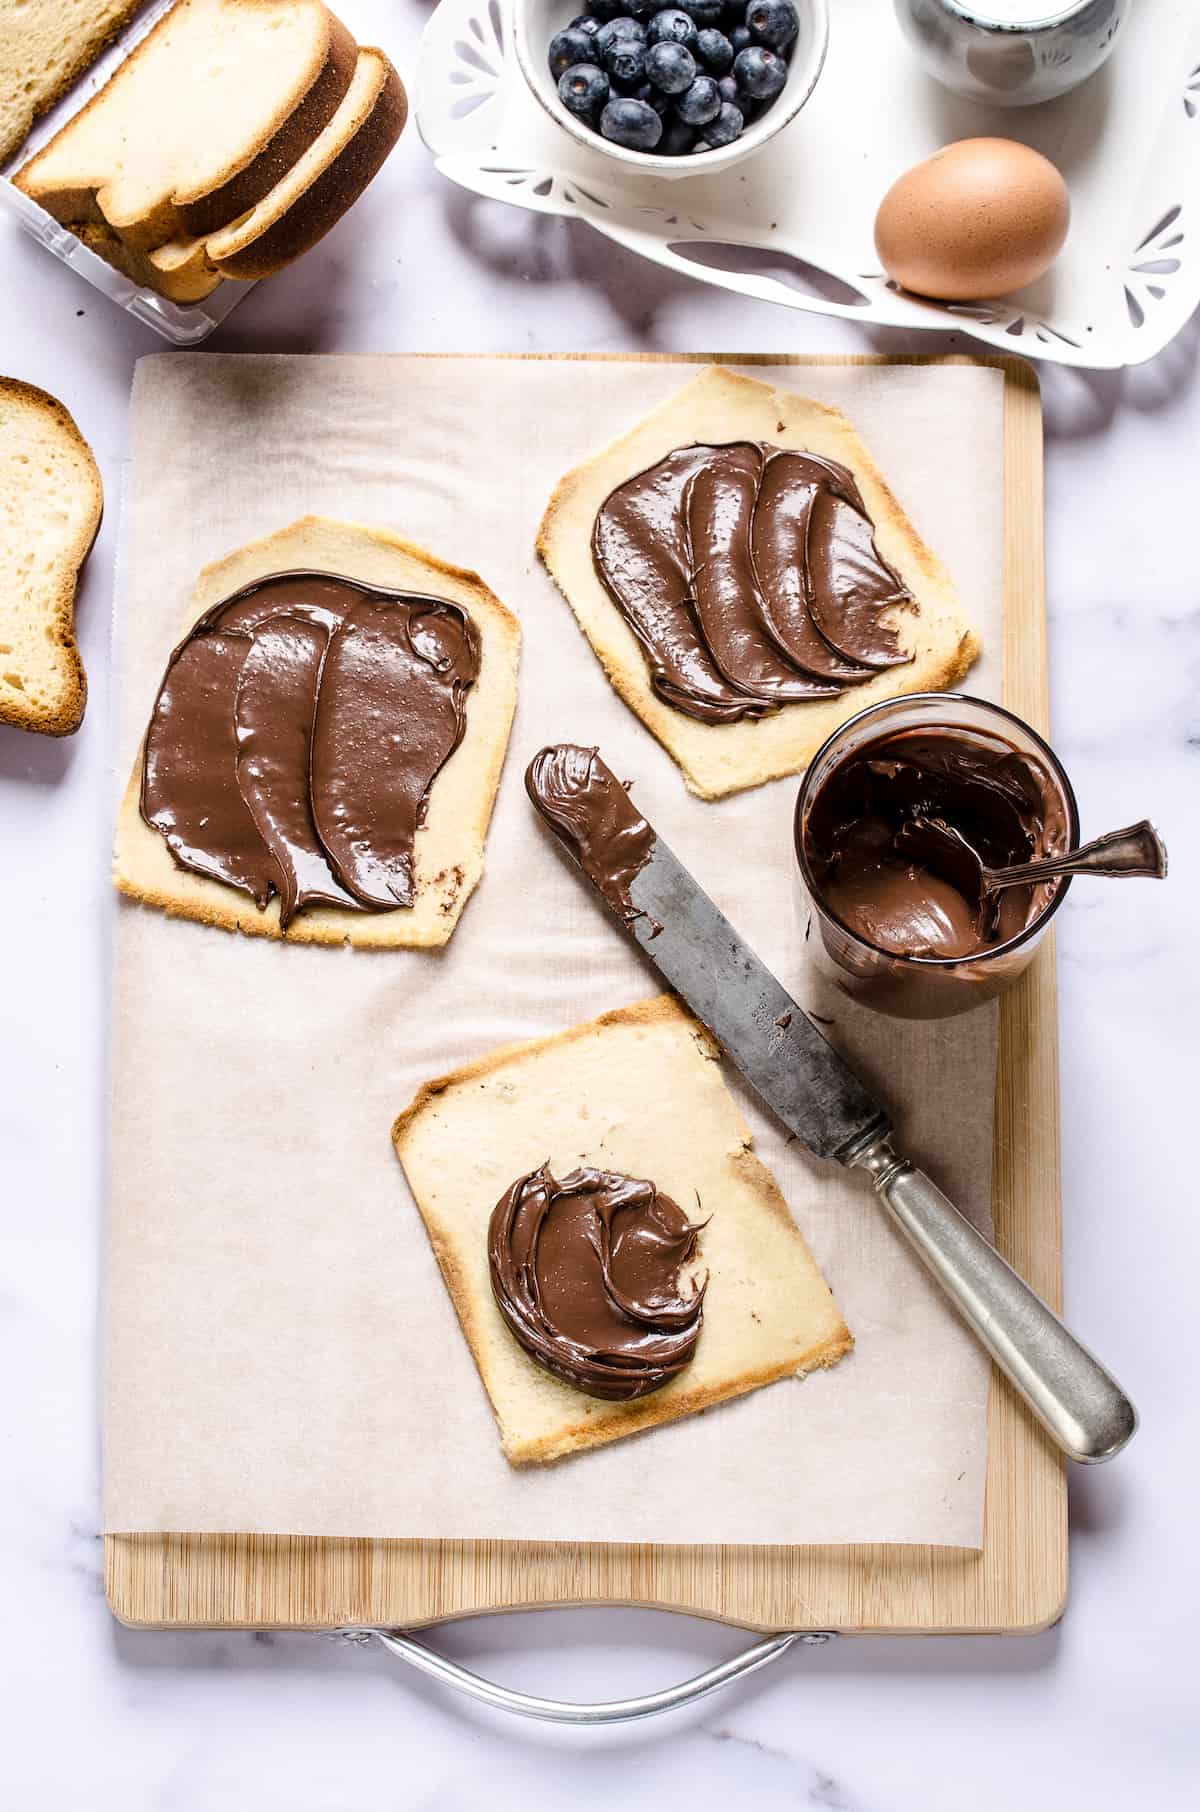 Three flattened pieces of bread with chocolate hazelnut spread on each one